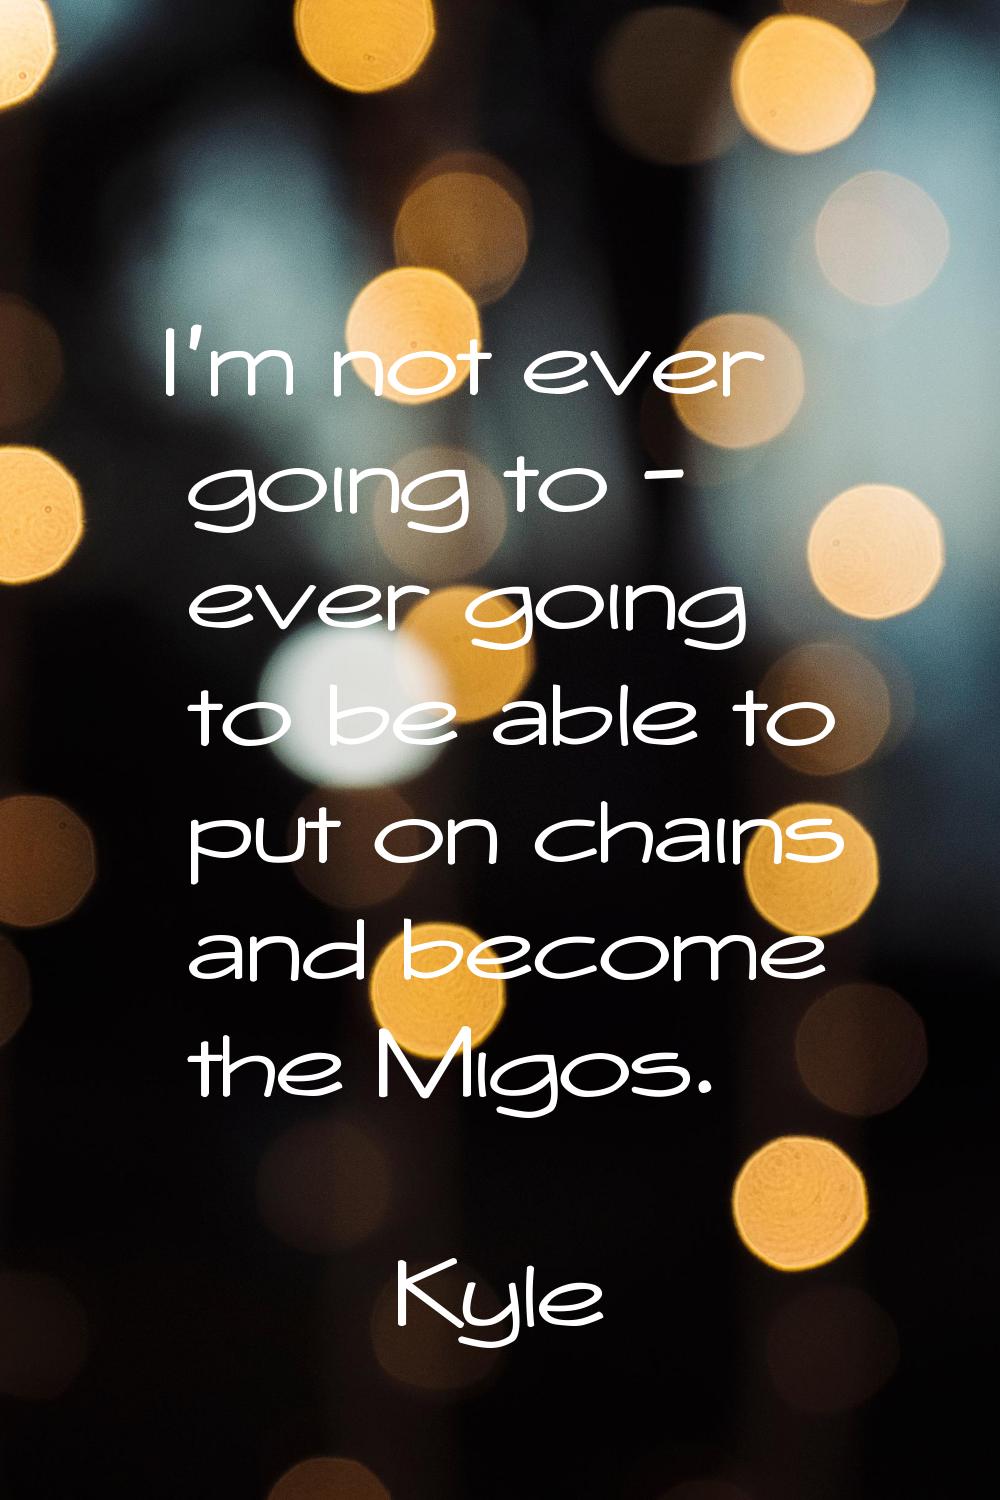 I'm not ever going to - ever going to be able to put on chains and become the Migos.